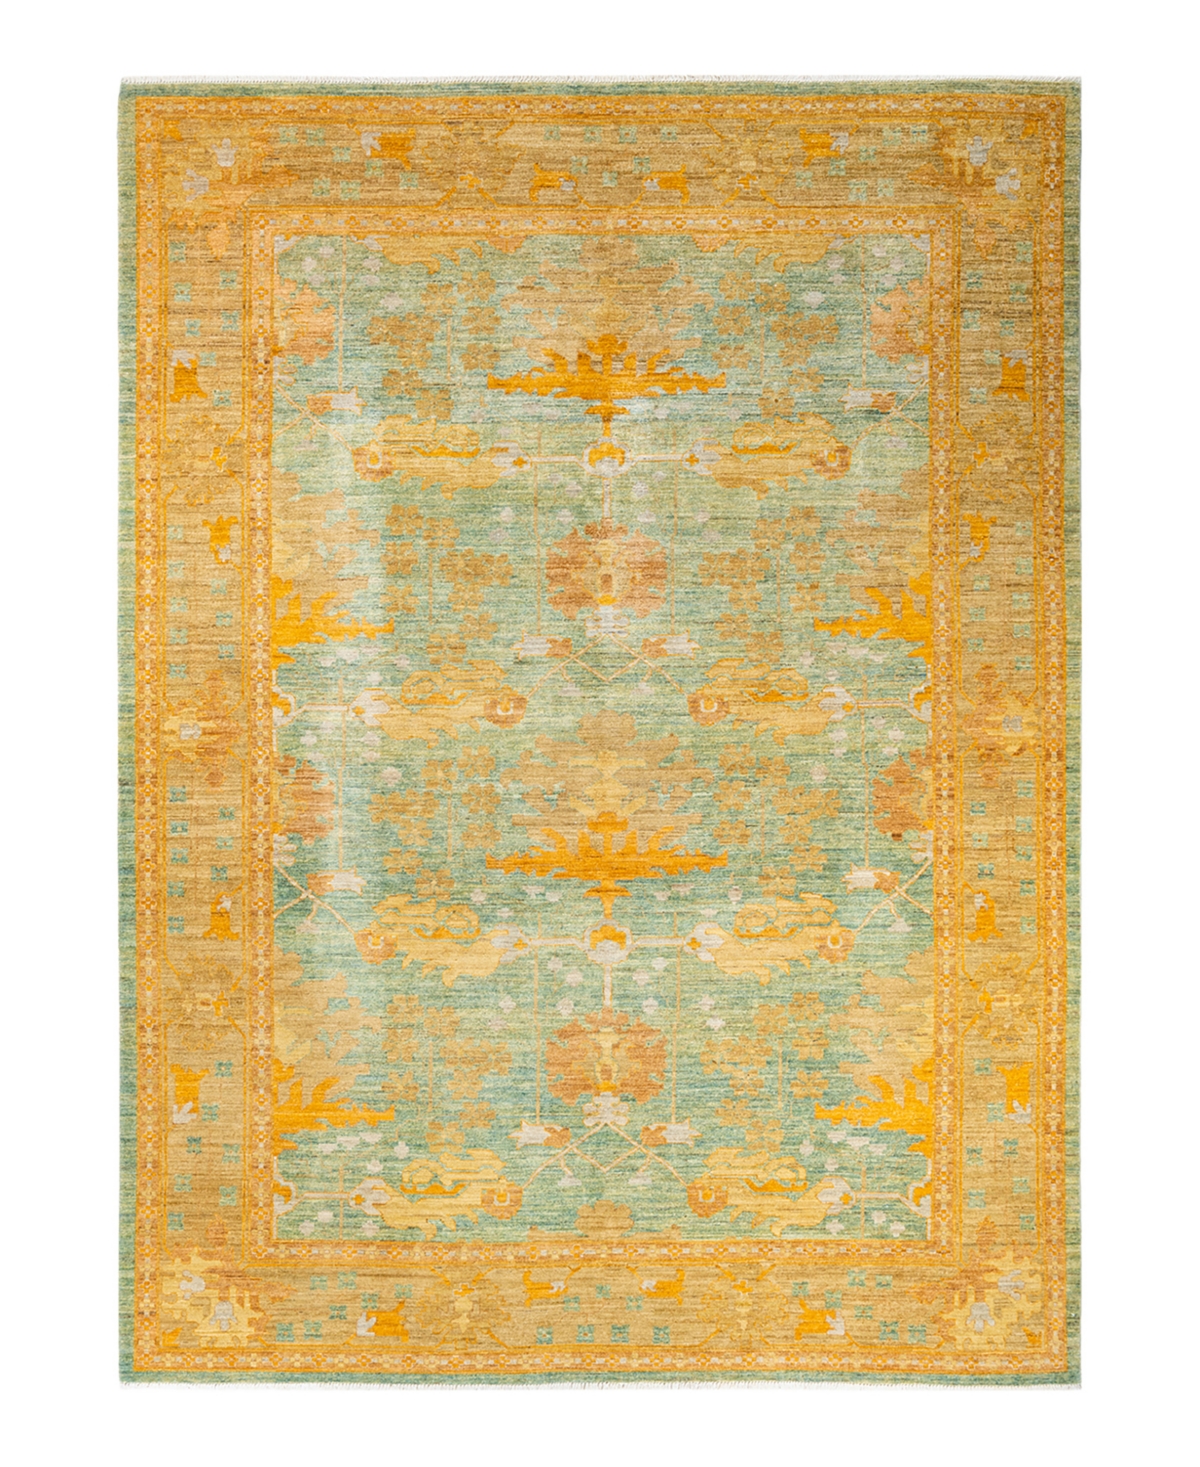 Adorn Hand Woven Rugs Arts Crafts M15731 8'1in x 11'1in Area Rug - Green